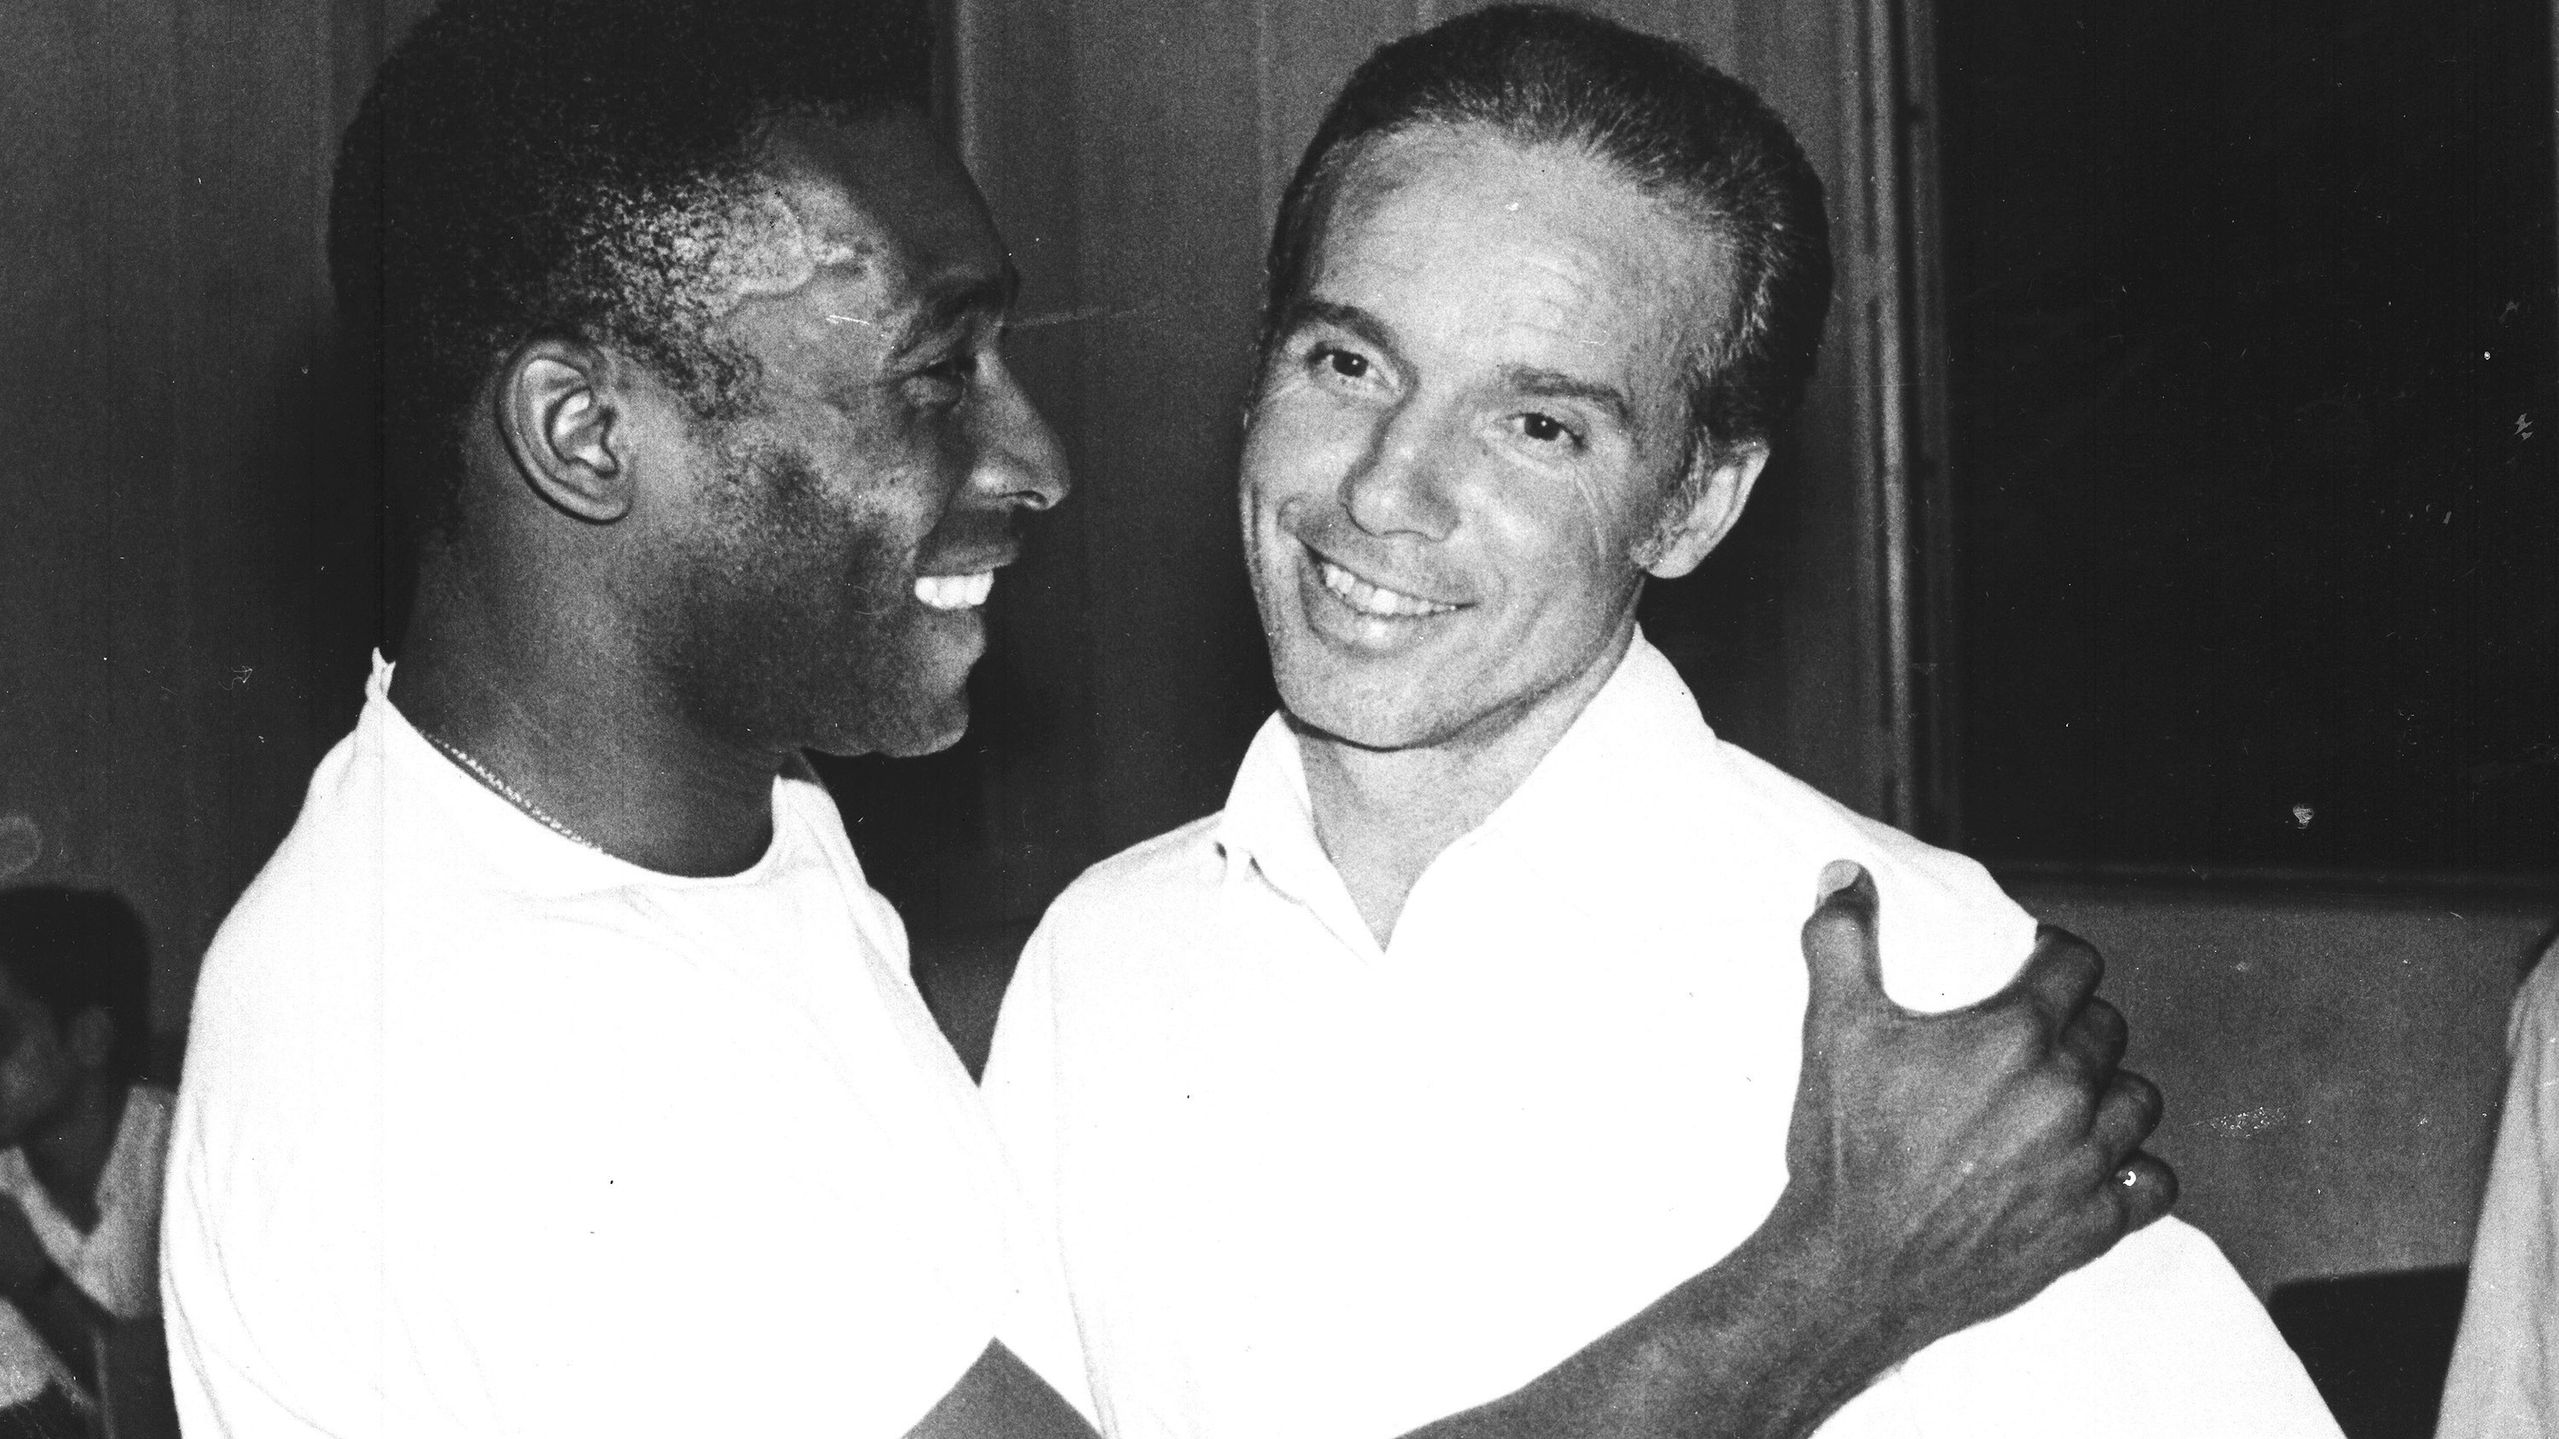 Brazil&#x27;s soccer star Pele, left, embraces Mario Zagallo after the latter&#x27;s appointment as coach of Brazil.